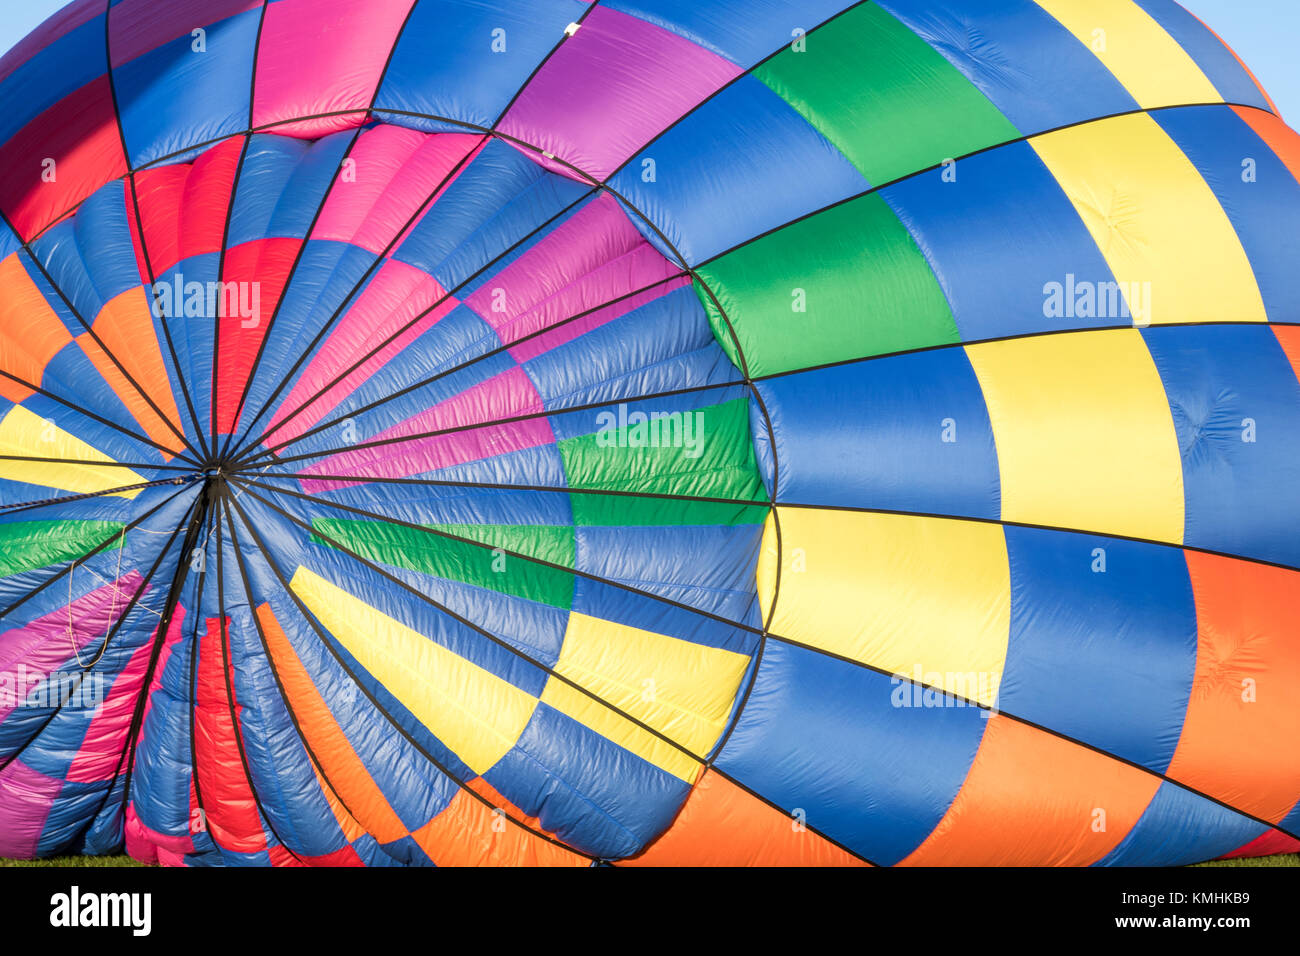 Partially inflated colorful checkerboard hot air balloon Stock Photo